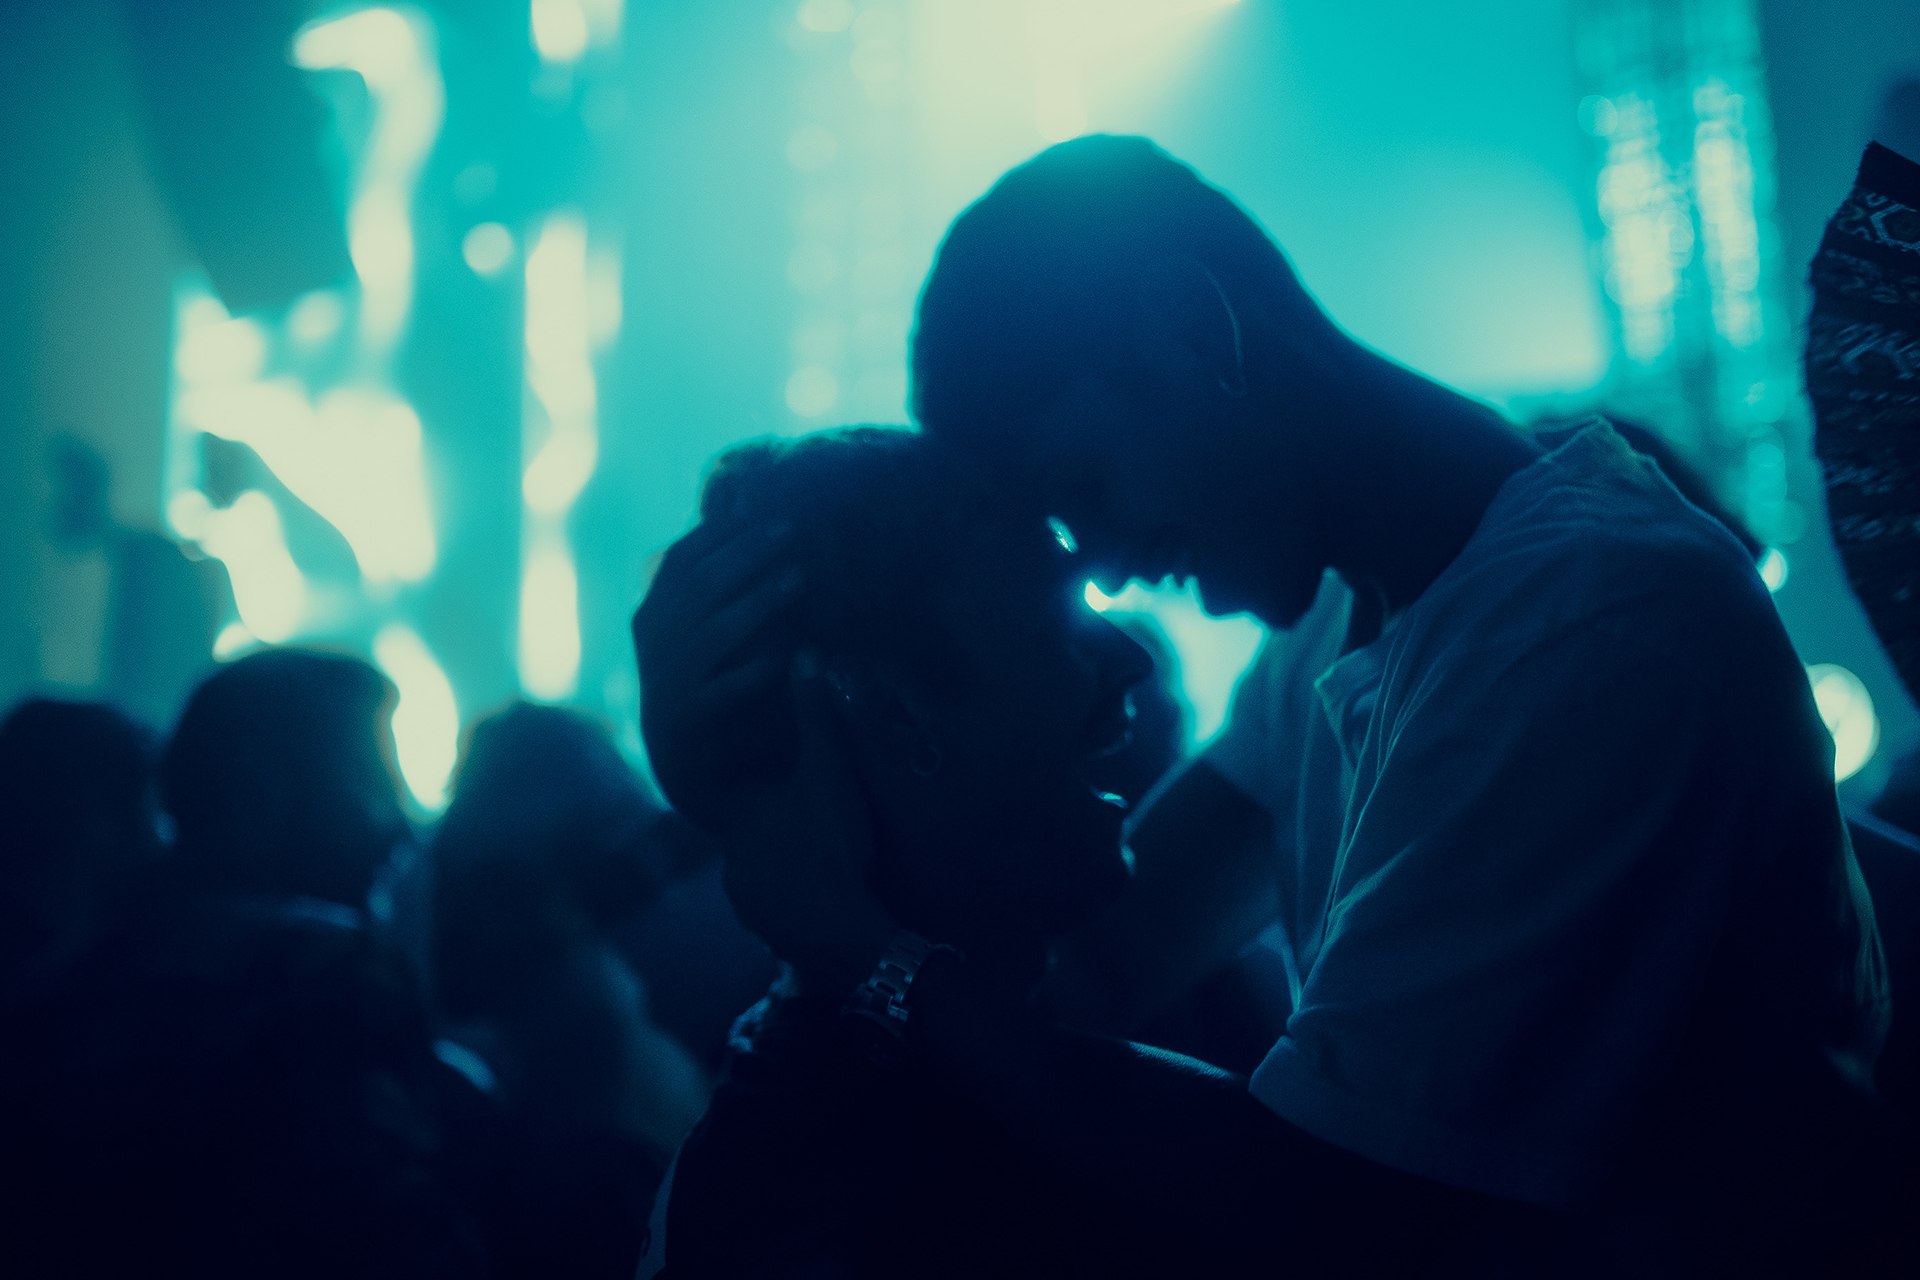 Silhouette of two people dancing with aqua lights in background at Heist Night Club